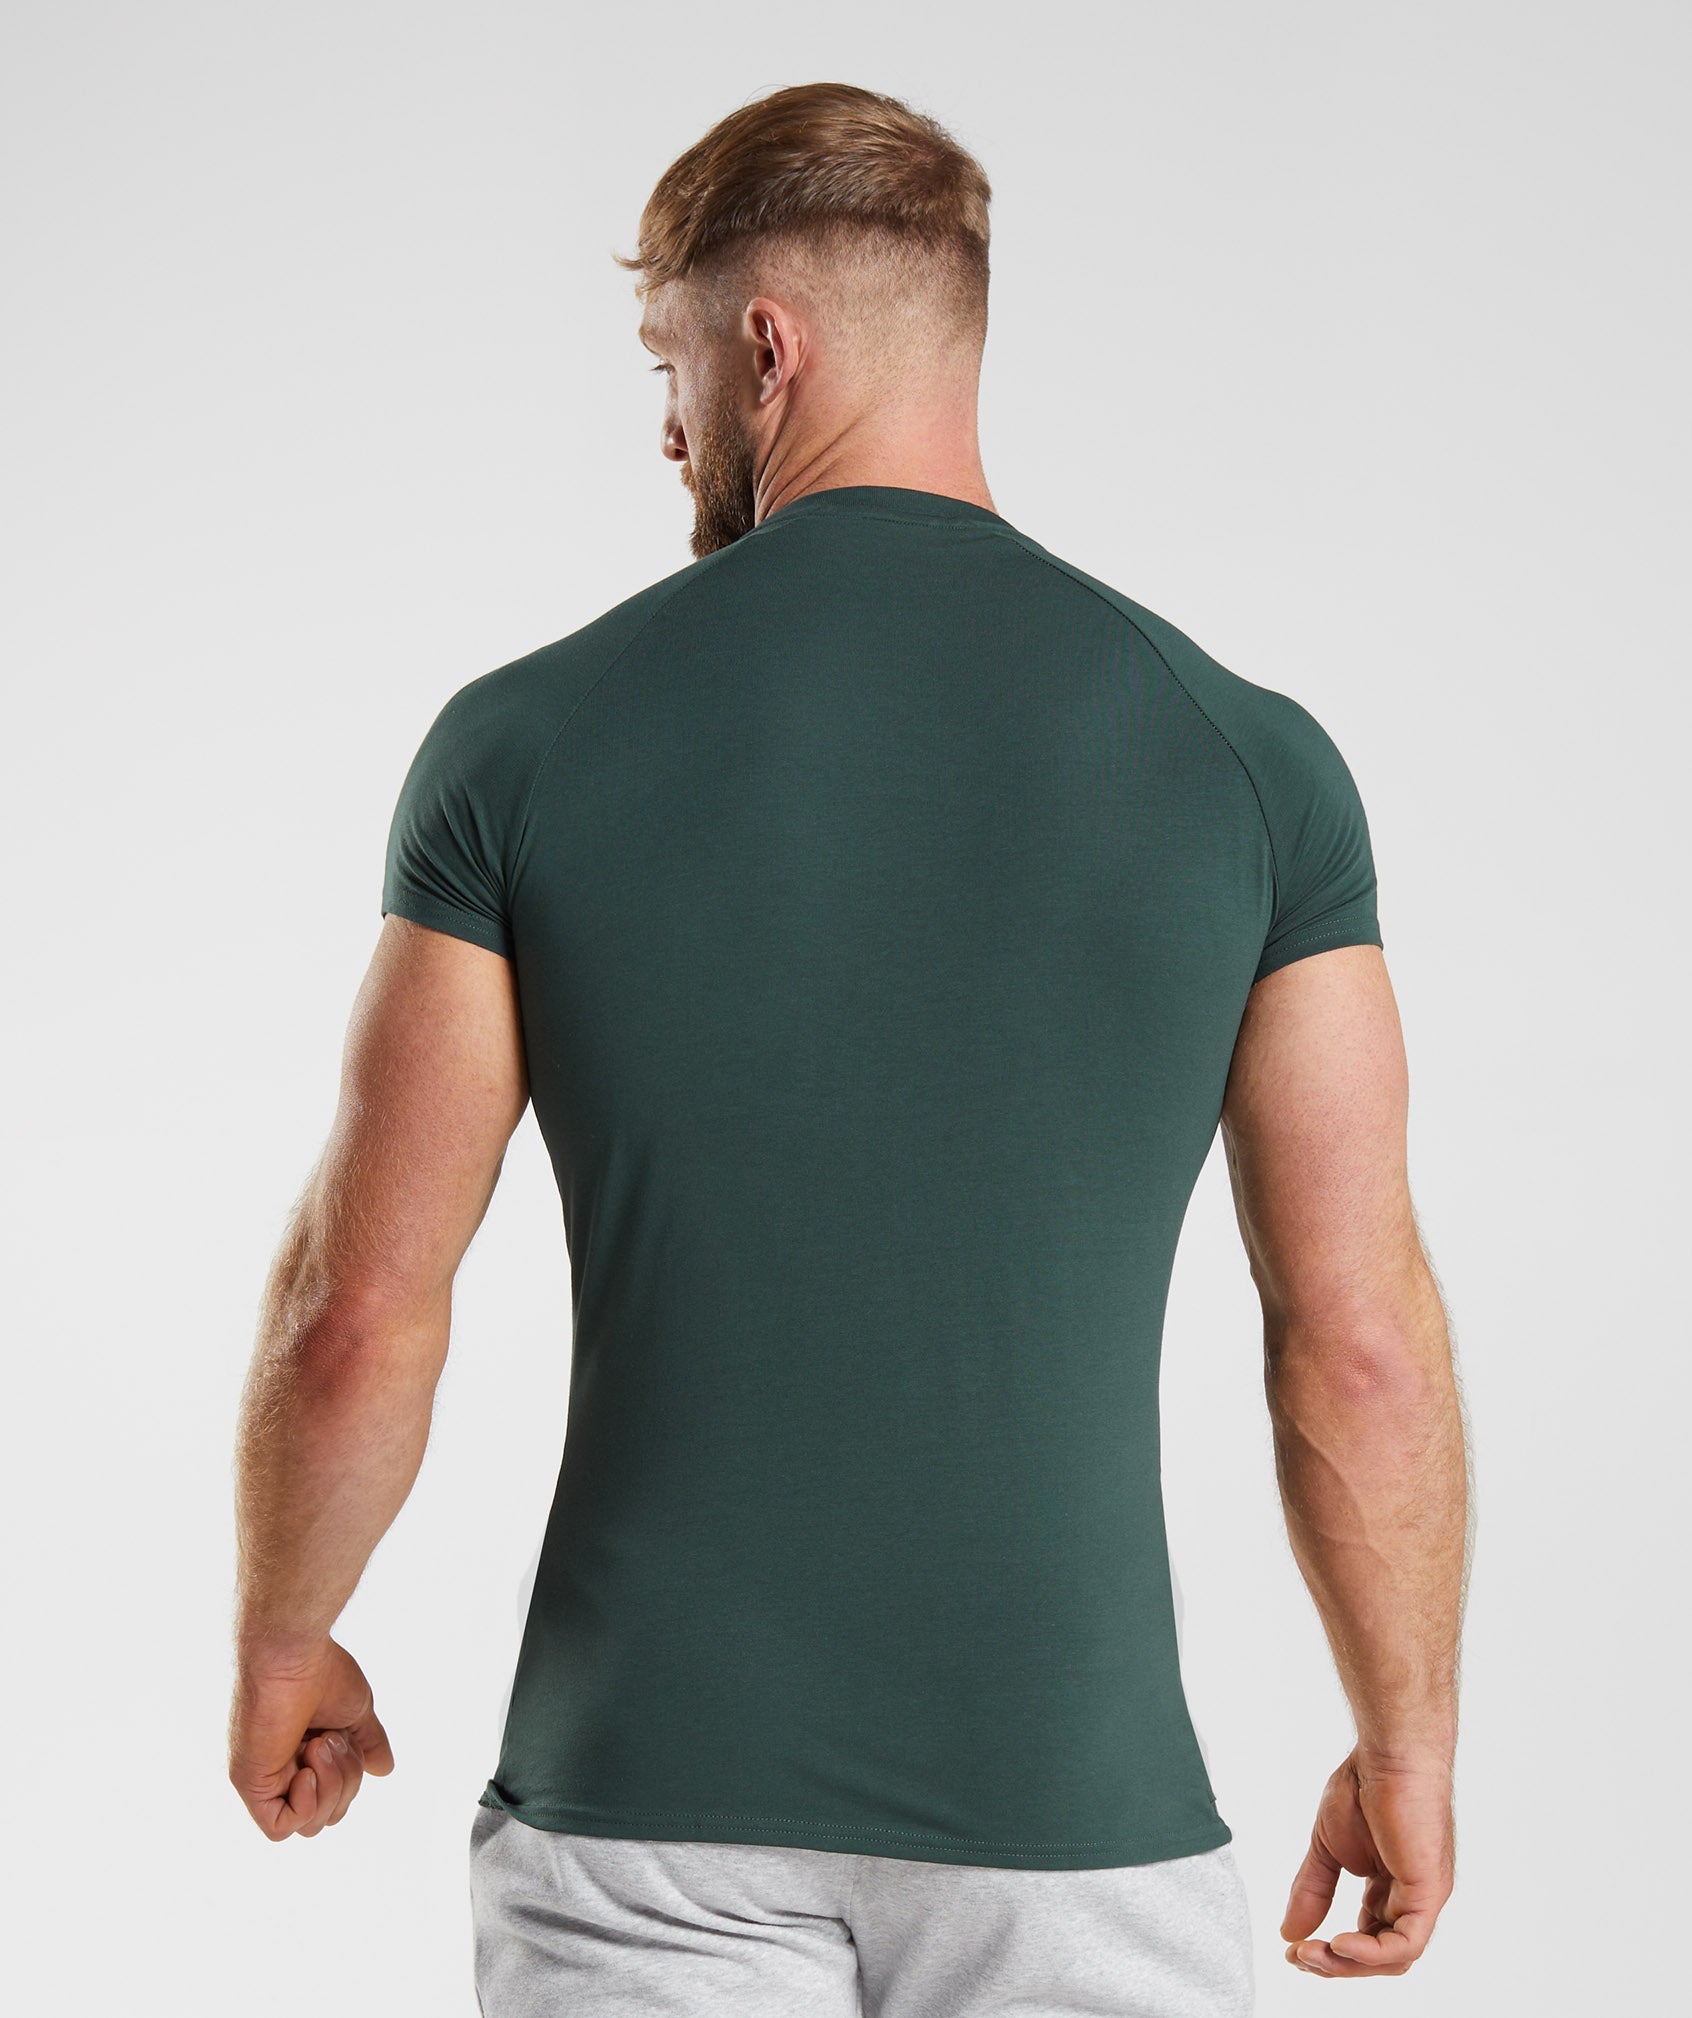 Apollo T-Shirt in Obsidian Green - view 2